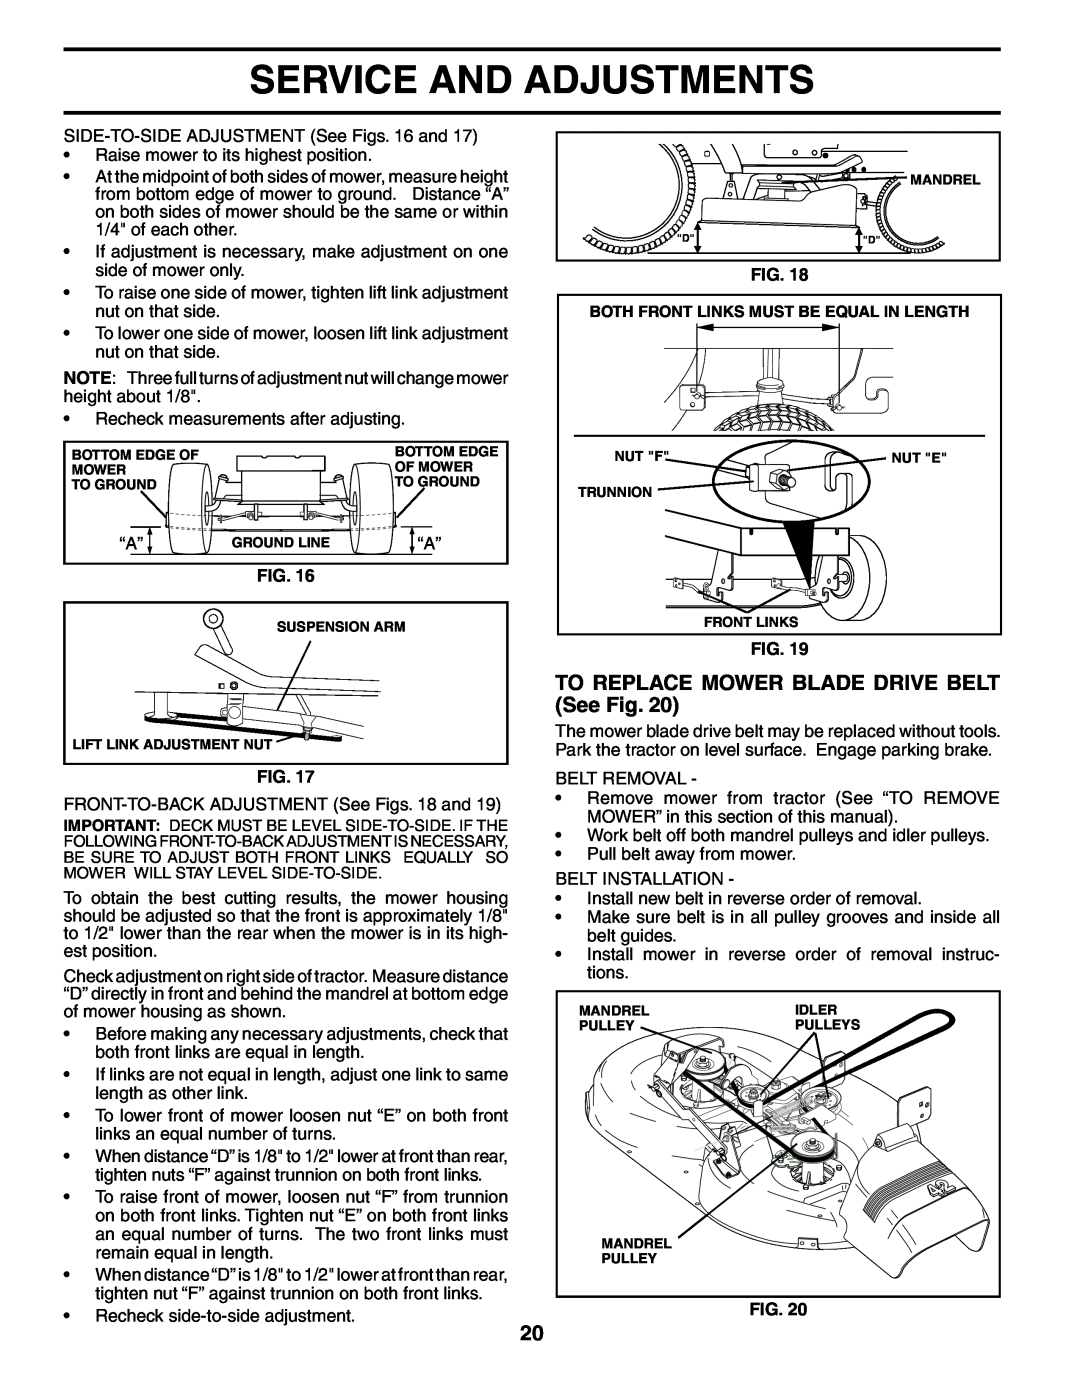 Ryobi 197788 manual TO REPLACE MOWER BLADE DRIVE BELT See Fig, Service And Adjustments 